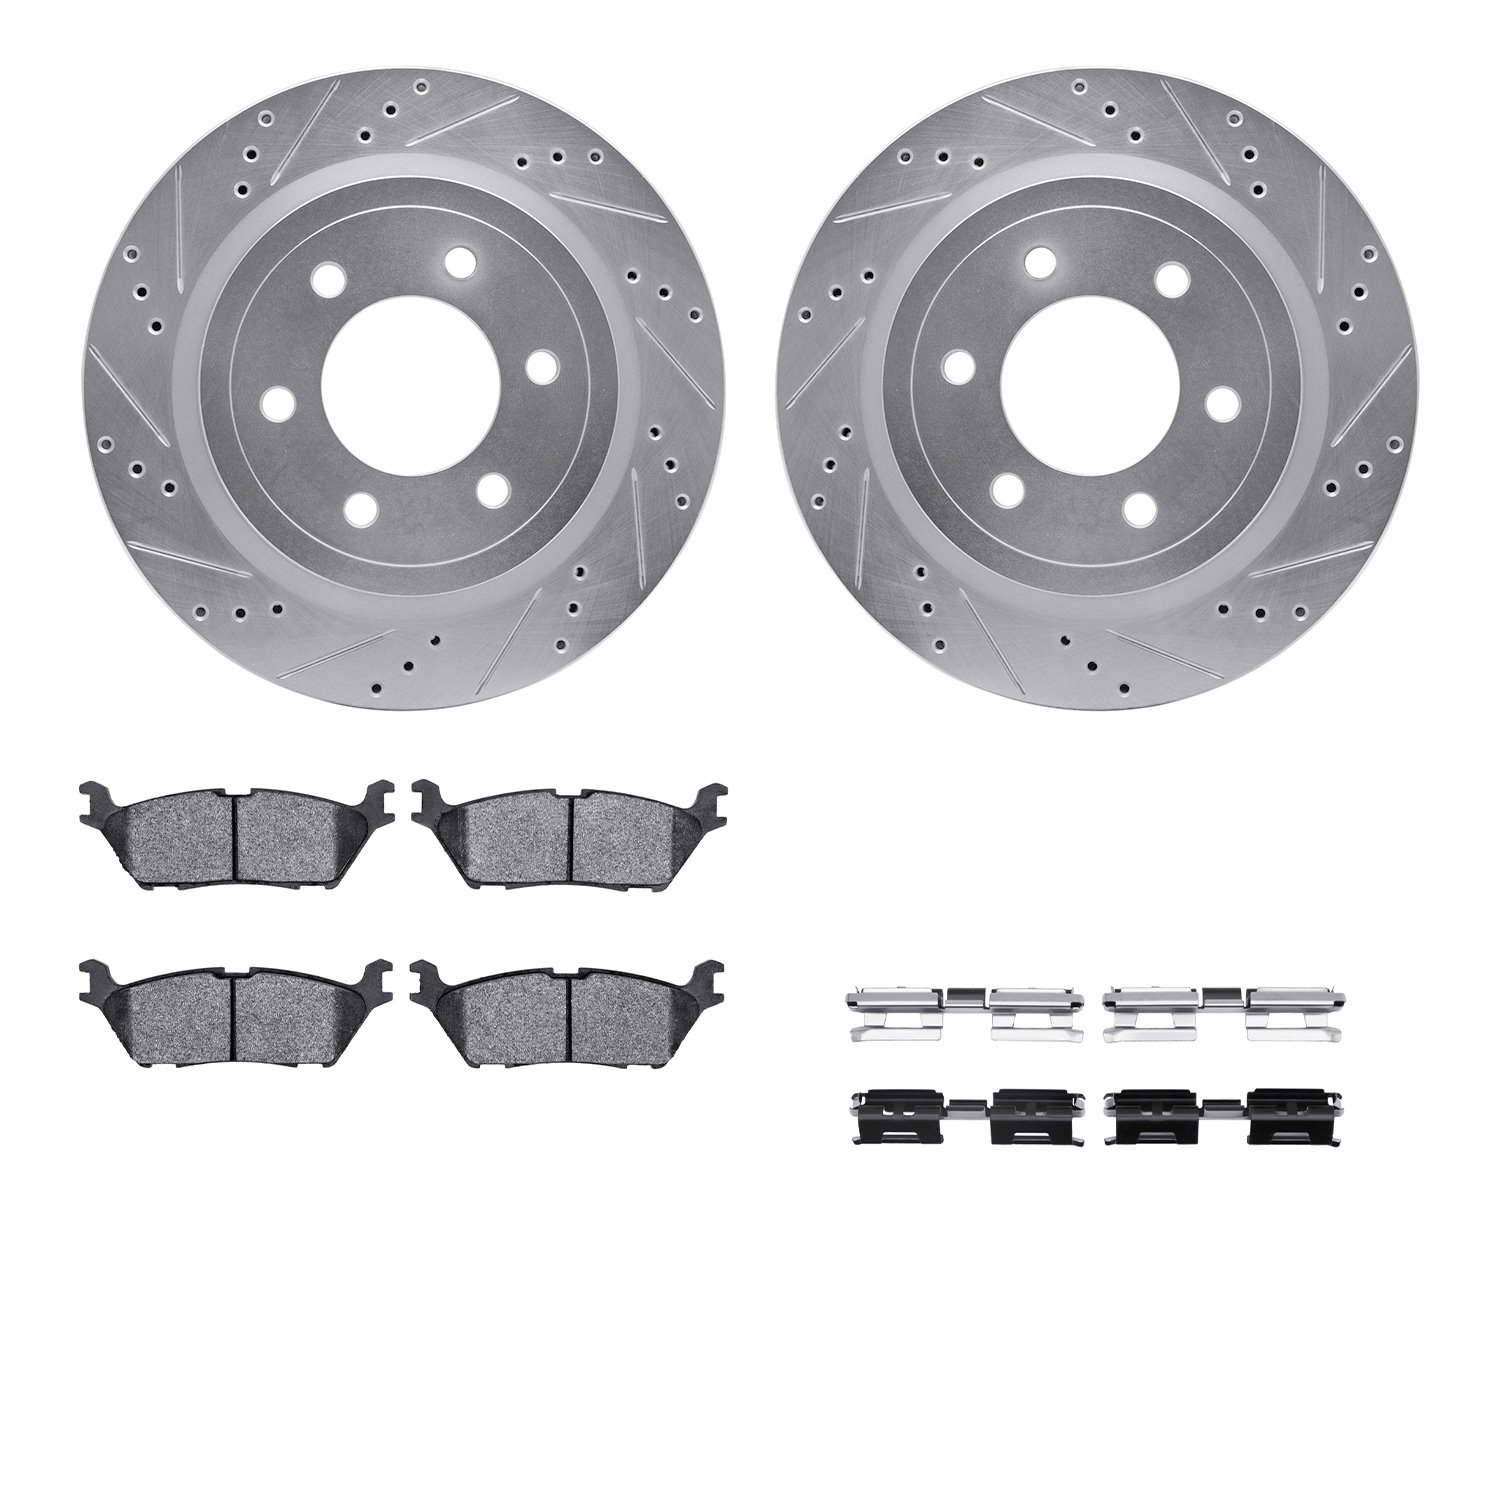 7412-54113 Drilled/Slotted Brake Rotors with Ultimate-Duty Brake Pads Kit & Hardware [Silver], 2018-2021 Ford/Lincoln/Mercury/Ma